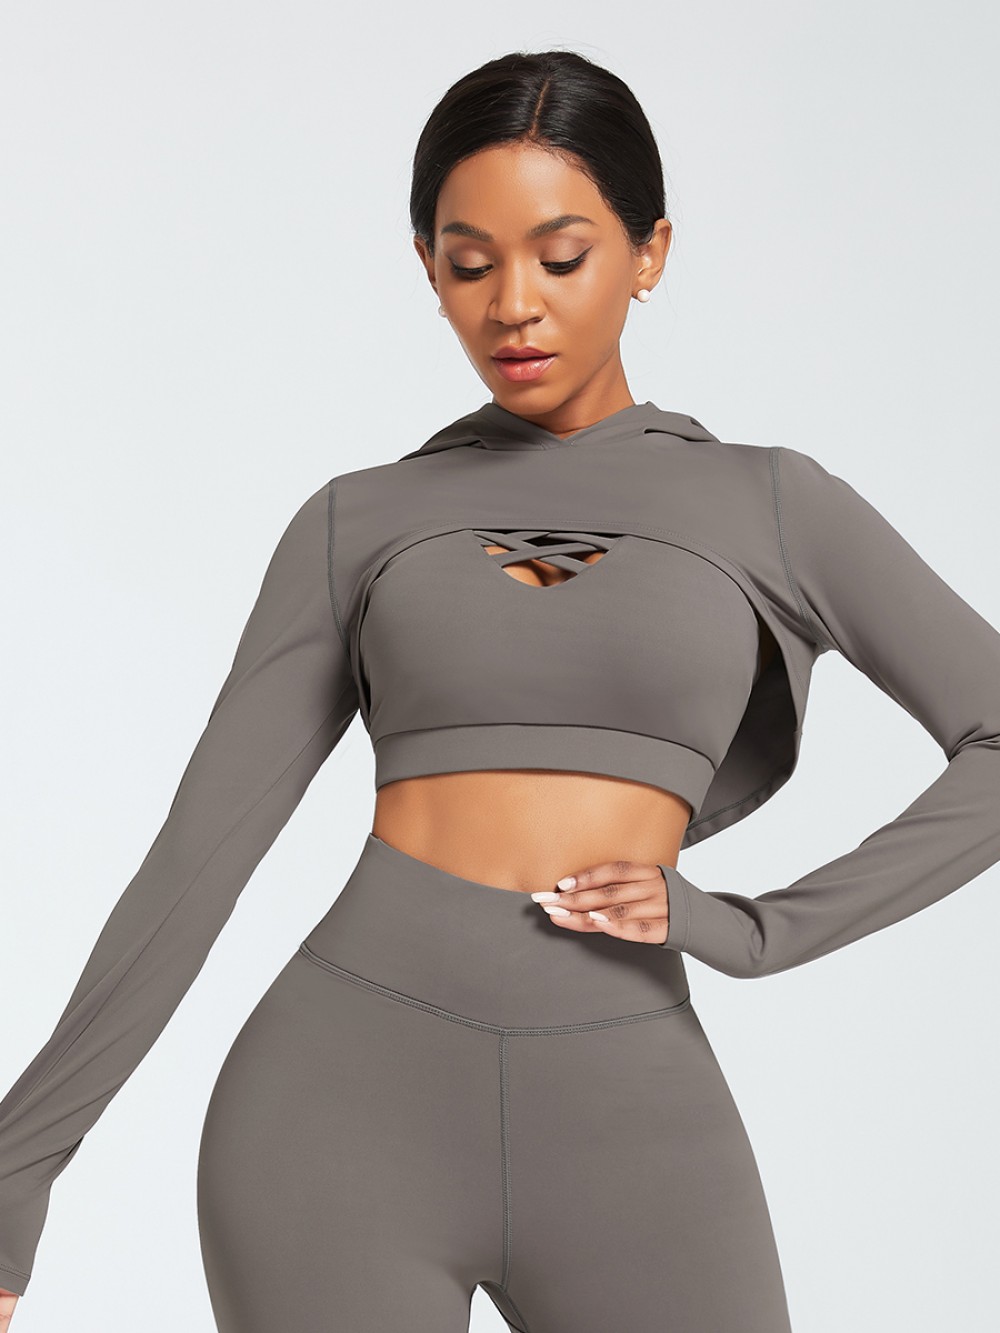 Gray Short Front Sports Top Long Sleeve Elastic Material